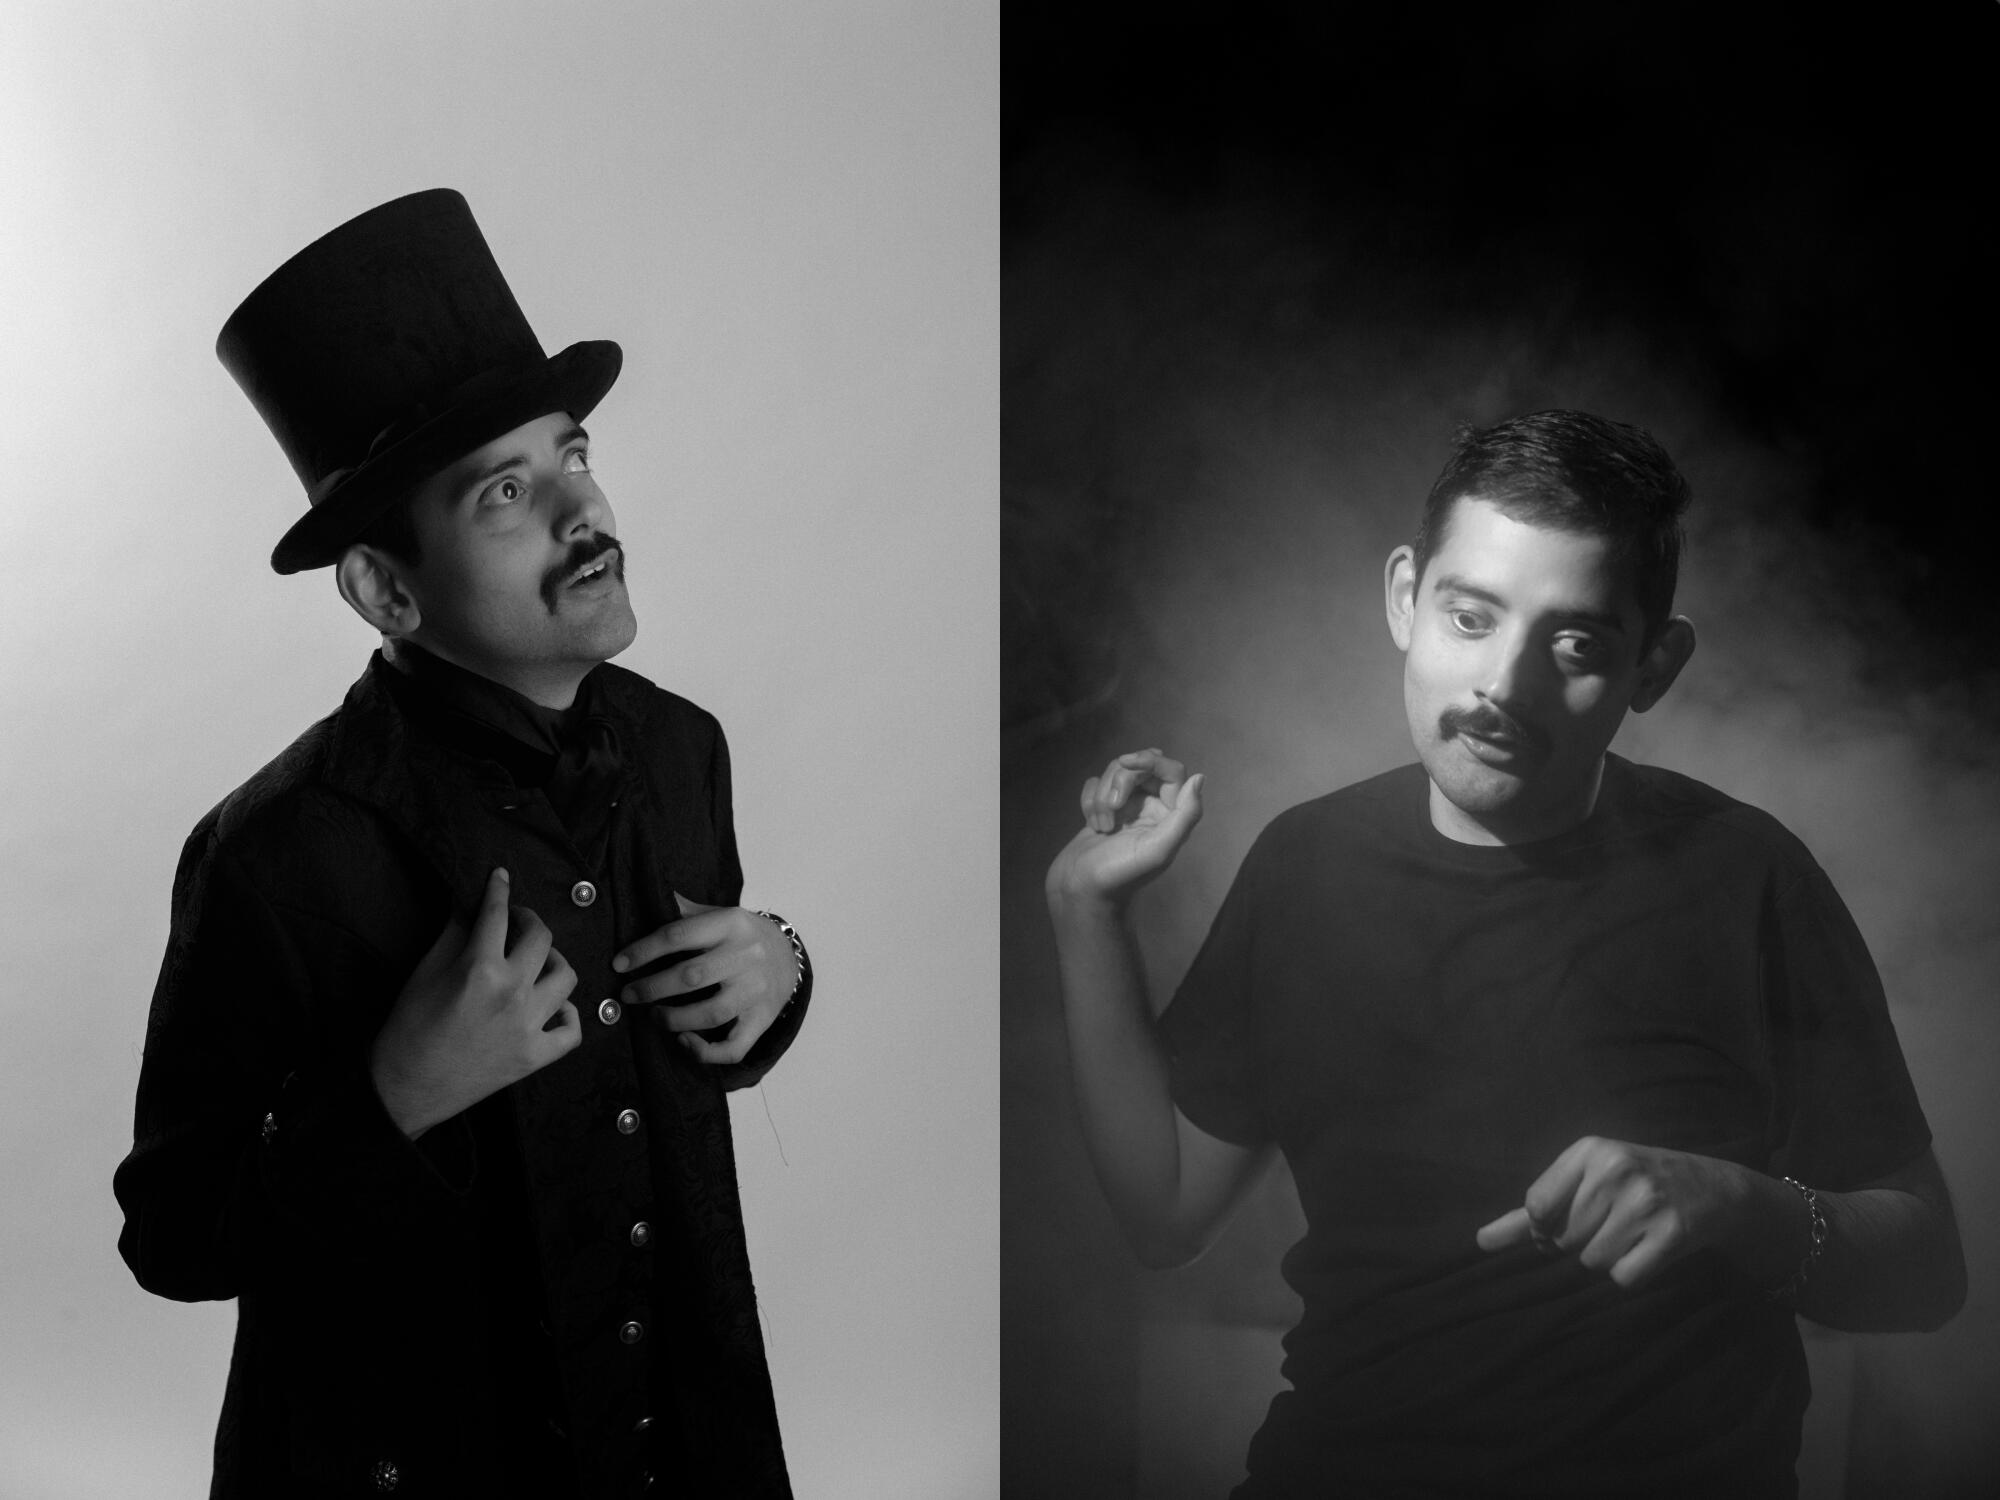 A split image shows a man in a top hat, left, and in a cloud of mist, right.